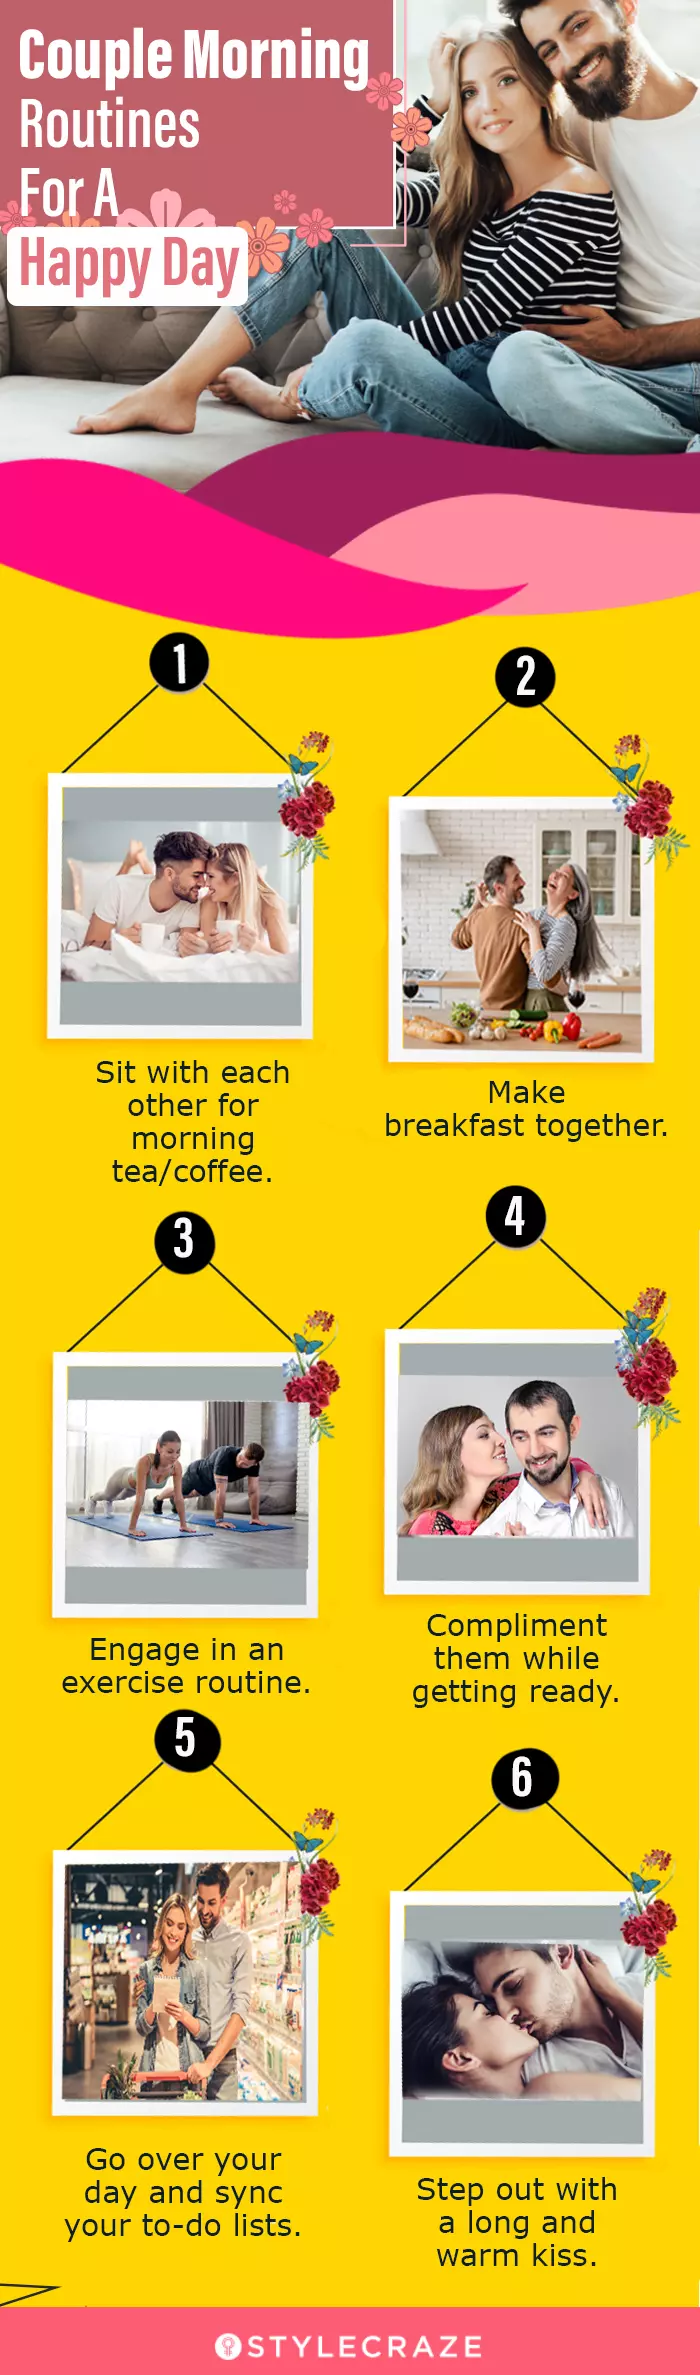 couple morning routines for a happy day (infographic)